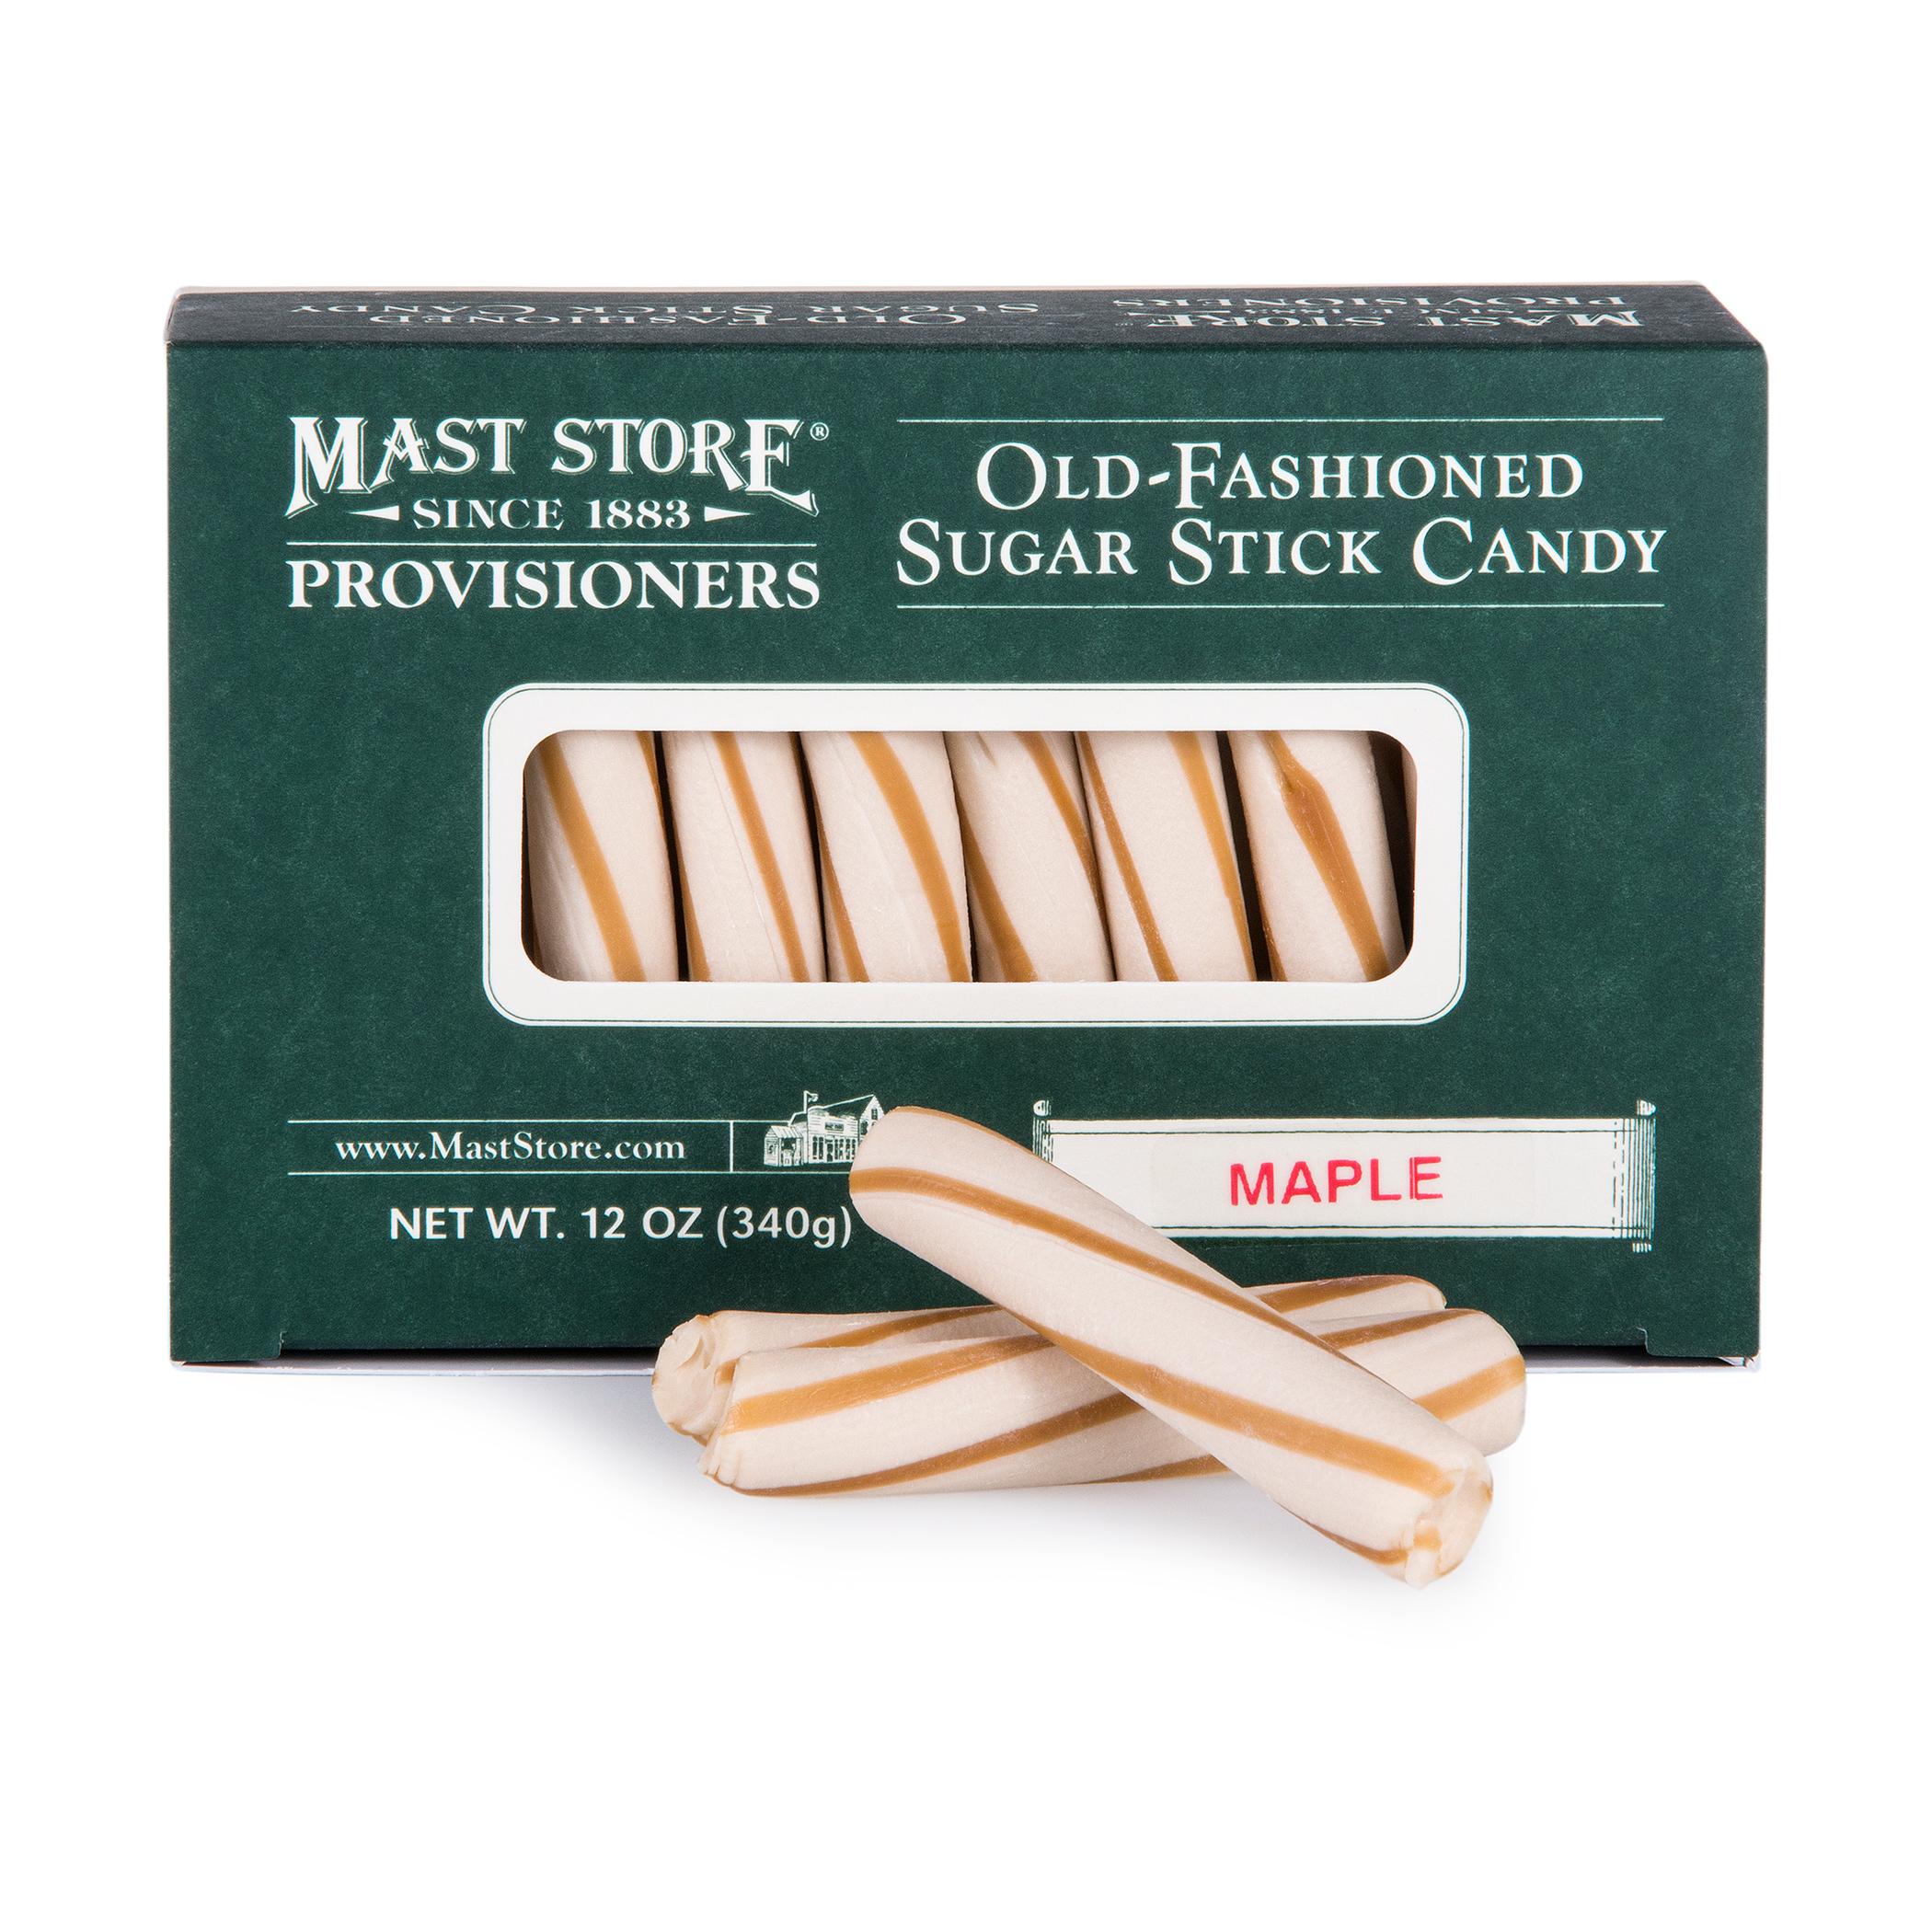  Mast Store Provisioners Maple Old- Fashioned Sugar Stick Candy